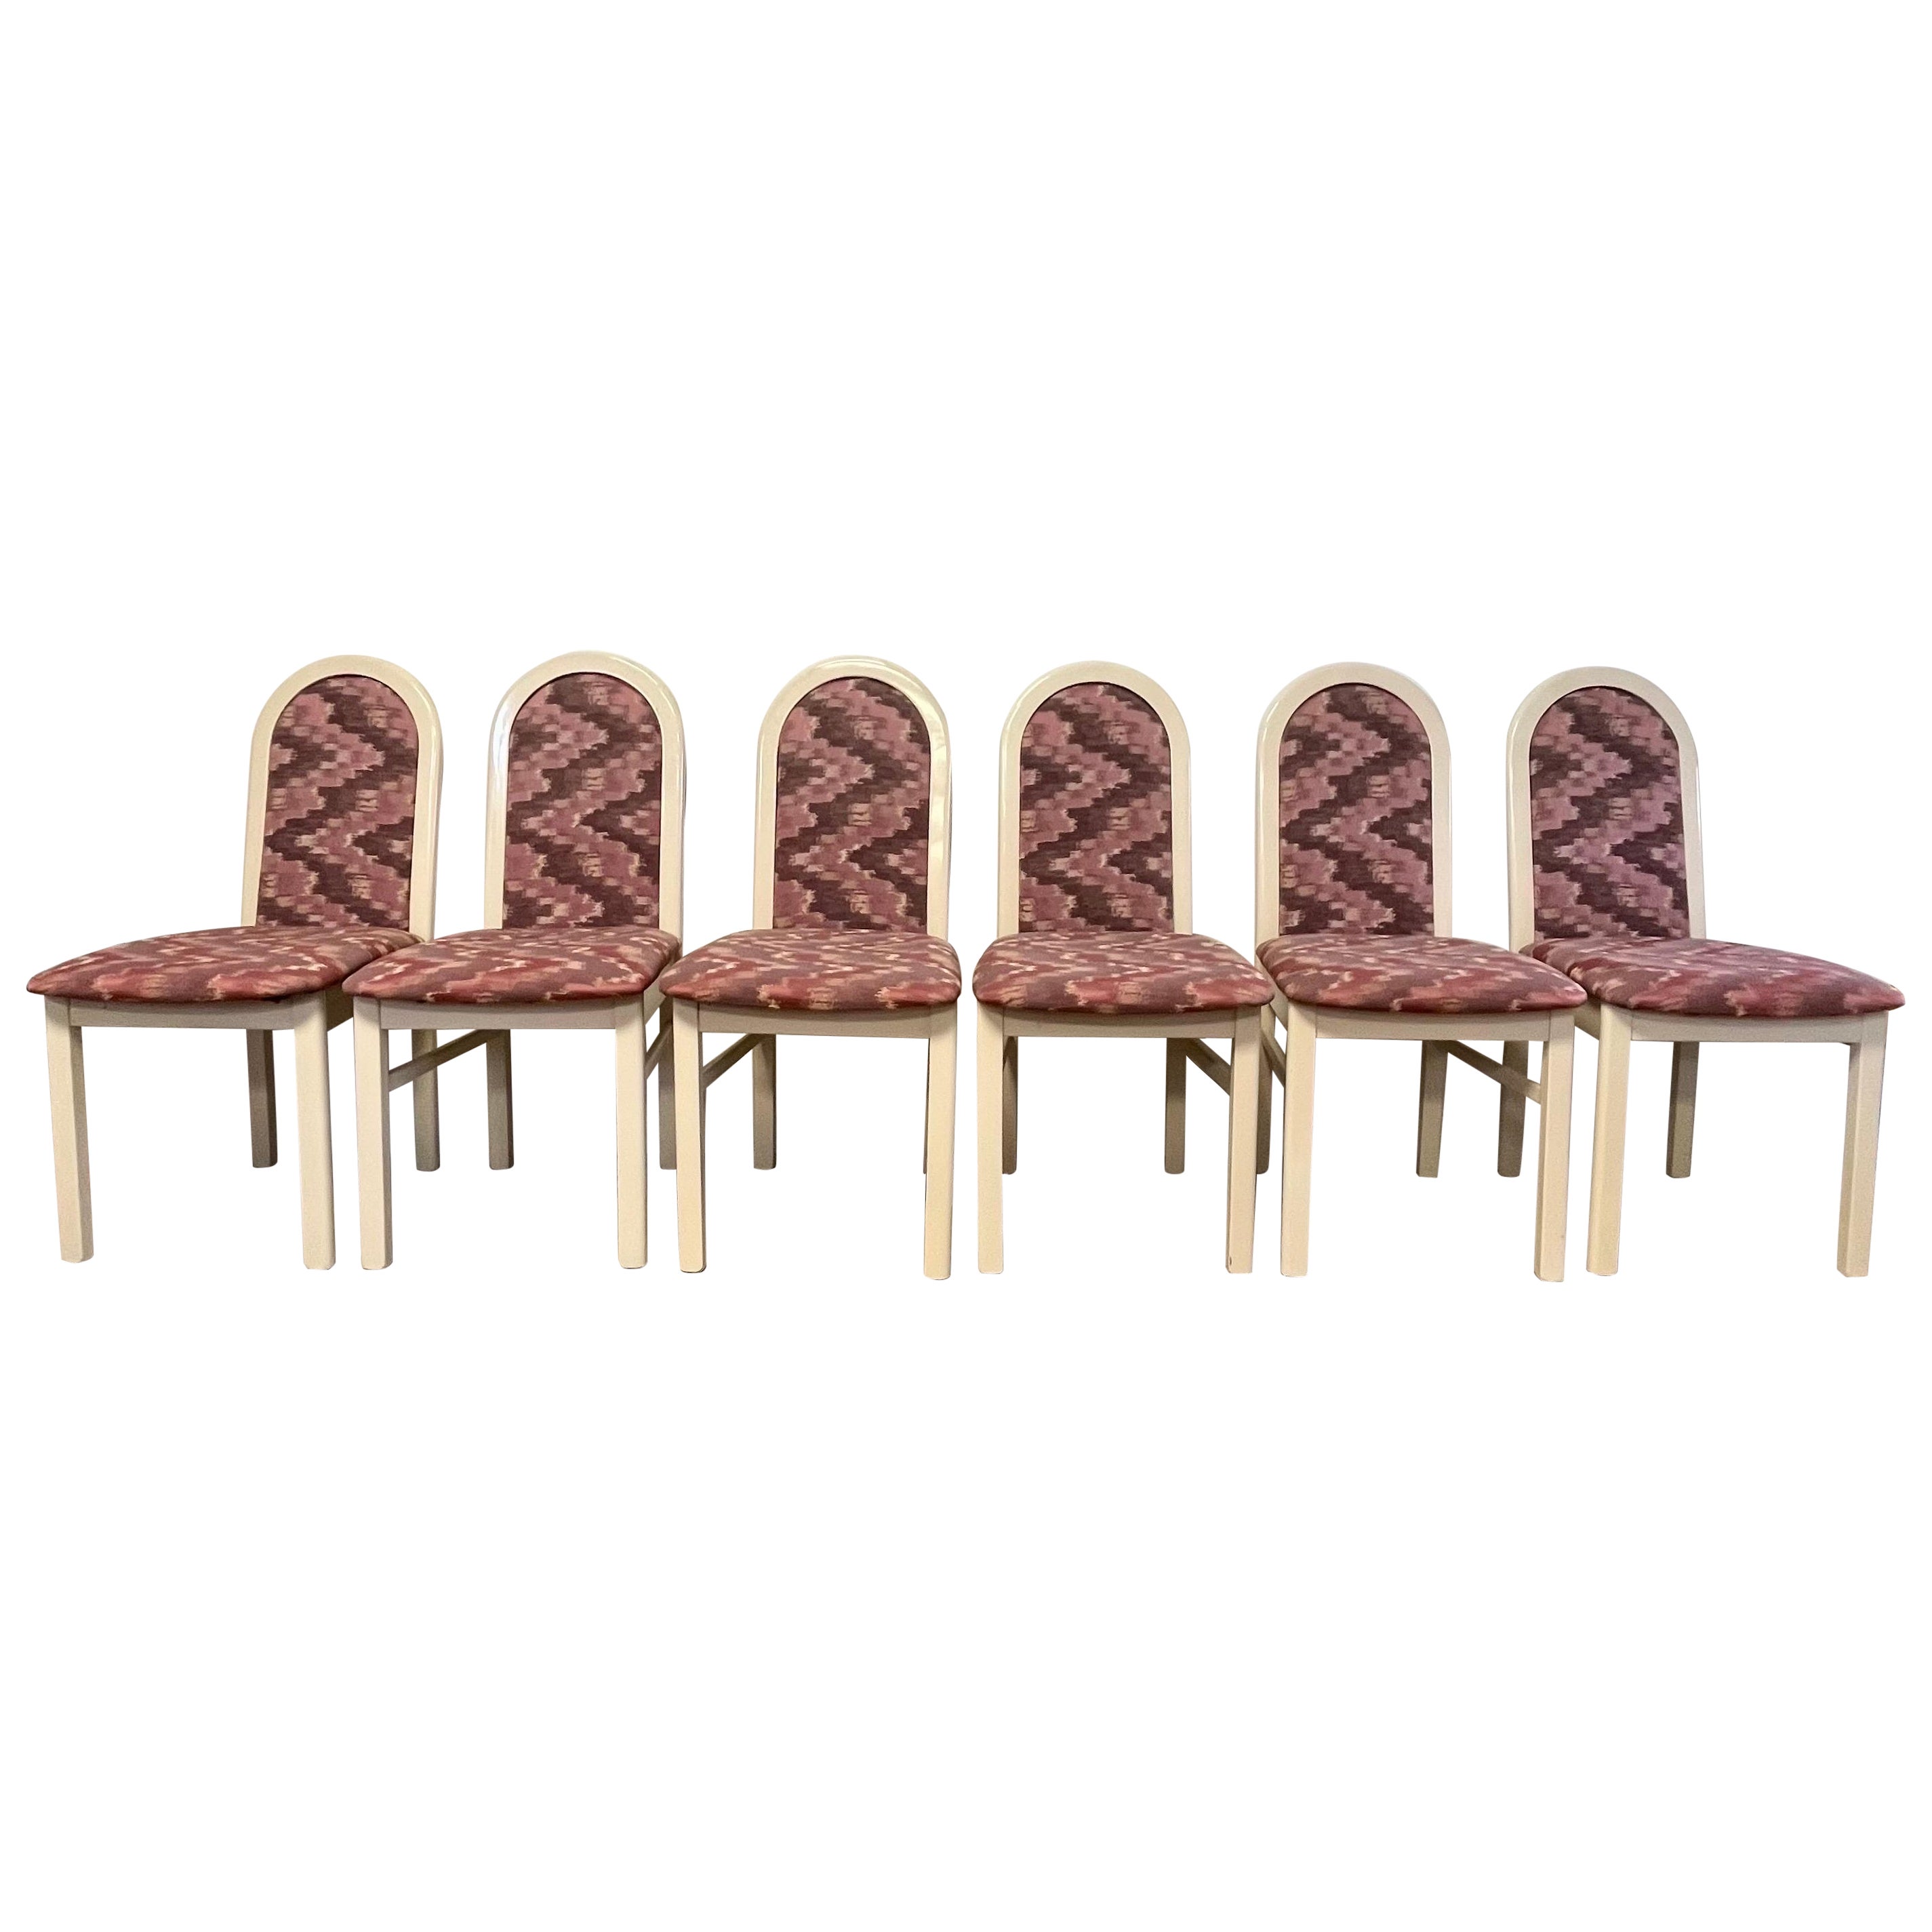 Postmodern Lacquered Dining Chairs 